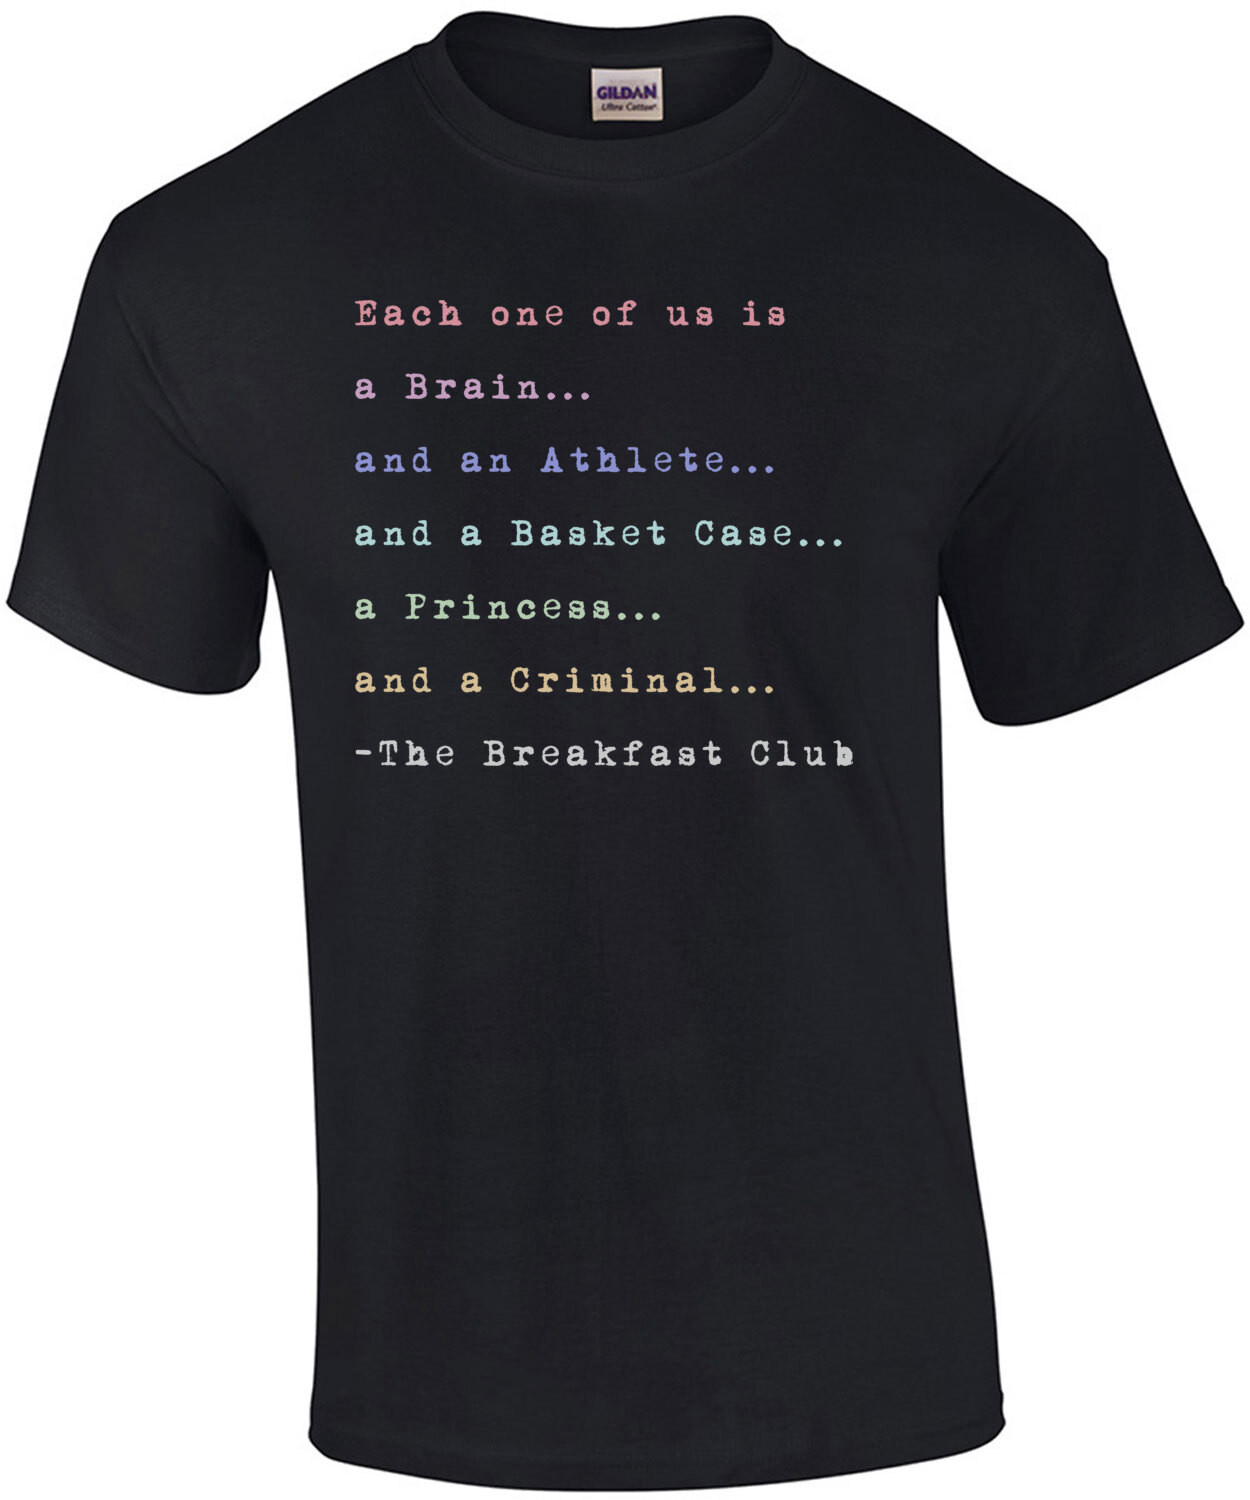 Each one of us stereotype The Breakfast Club T-Shirt